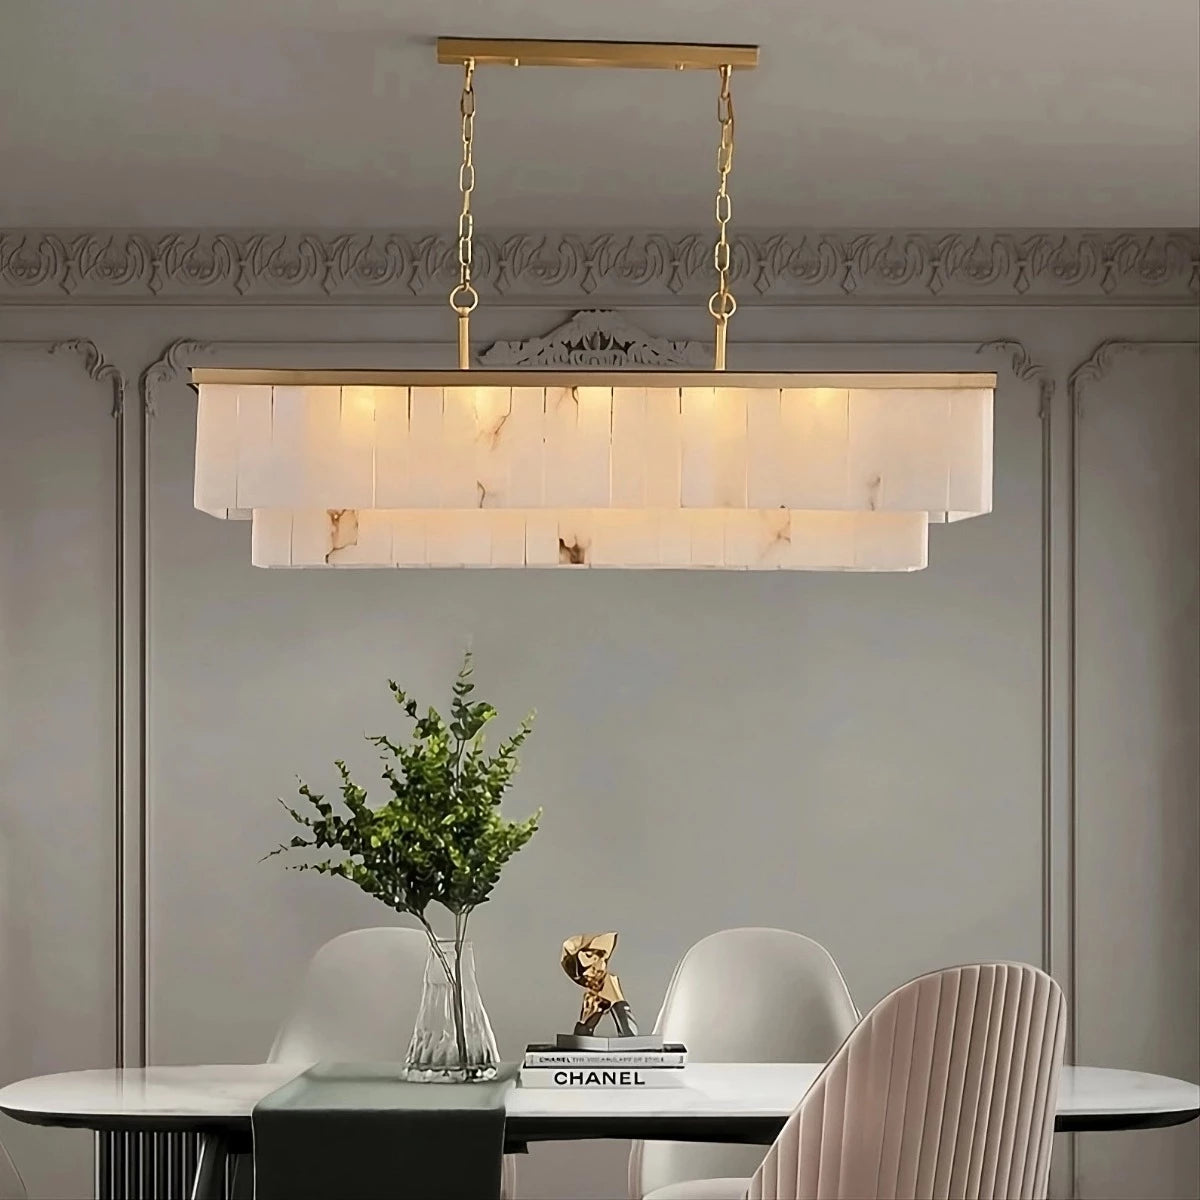 A dining room features a modern brass chandelier, the Shopp578 Natural Calcite Dining Room Chandelier, with two tiers of rectangular natural calcite panels, emitting a warm light. Below, a white dining table holds a clear vase with green foliage and a small decorative item. The chairs are neutral tones, and the walls are gray.